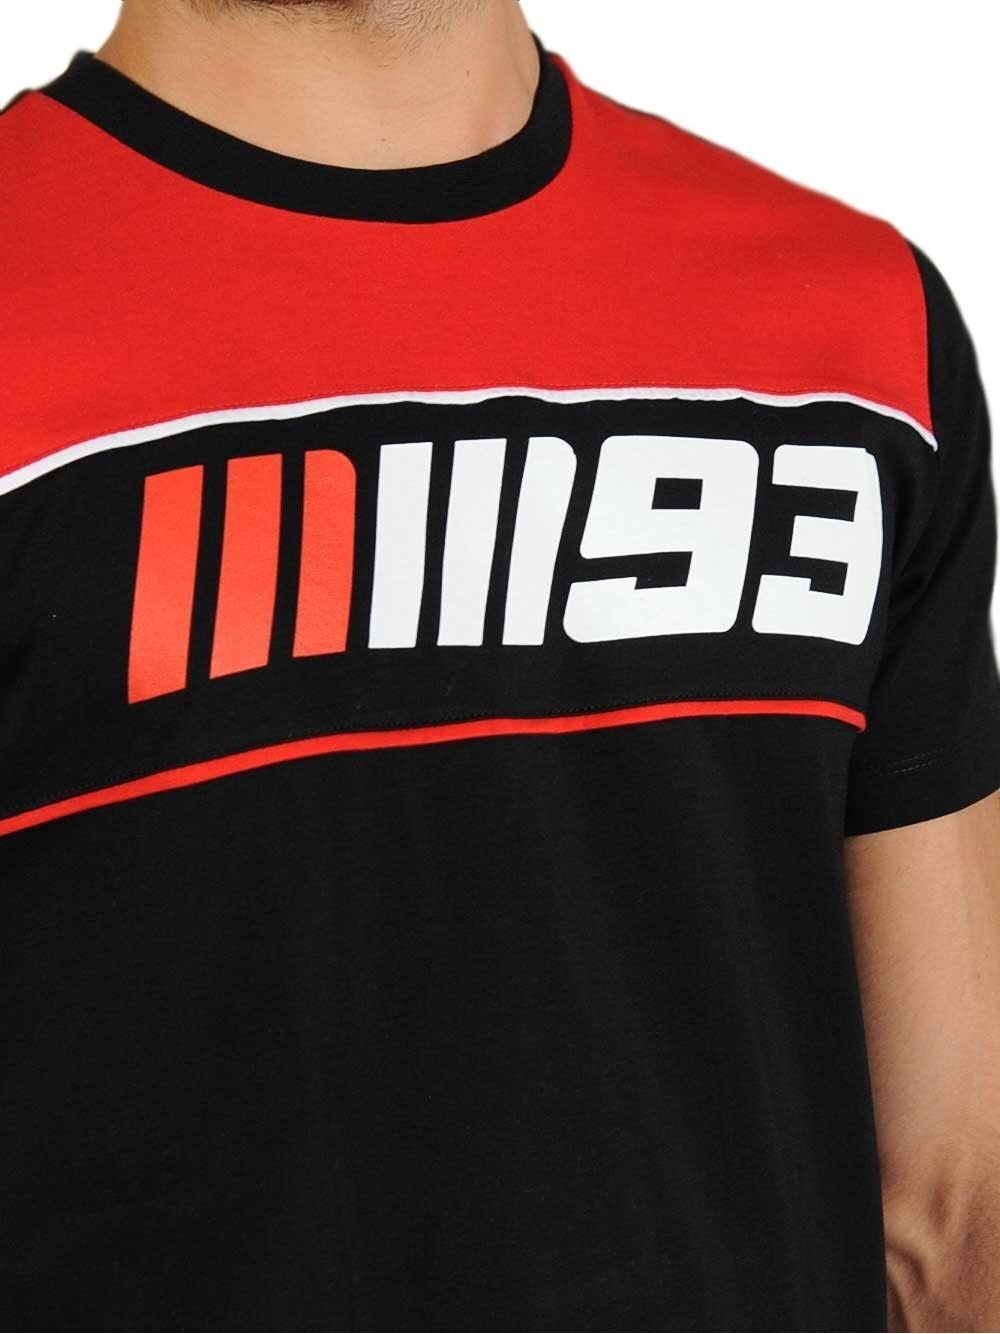 New Official Marc Marquez 93 Inserted T-Shirt - 16 33074